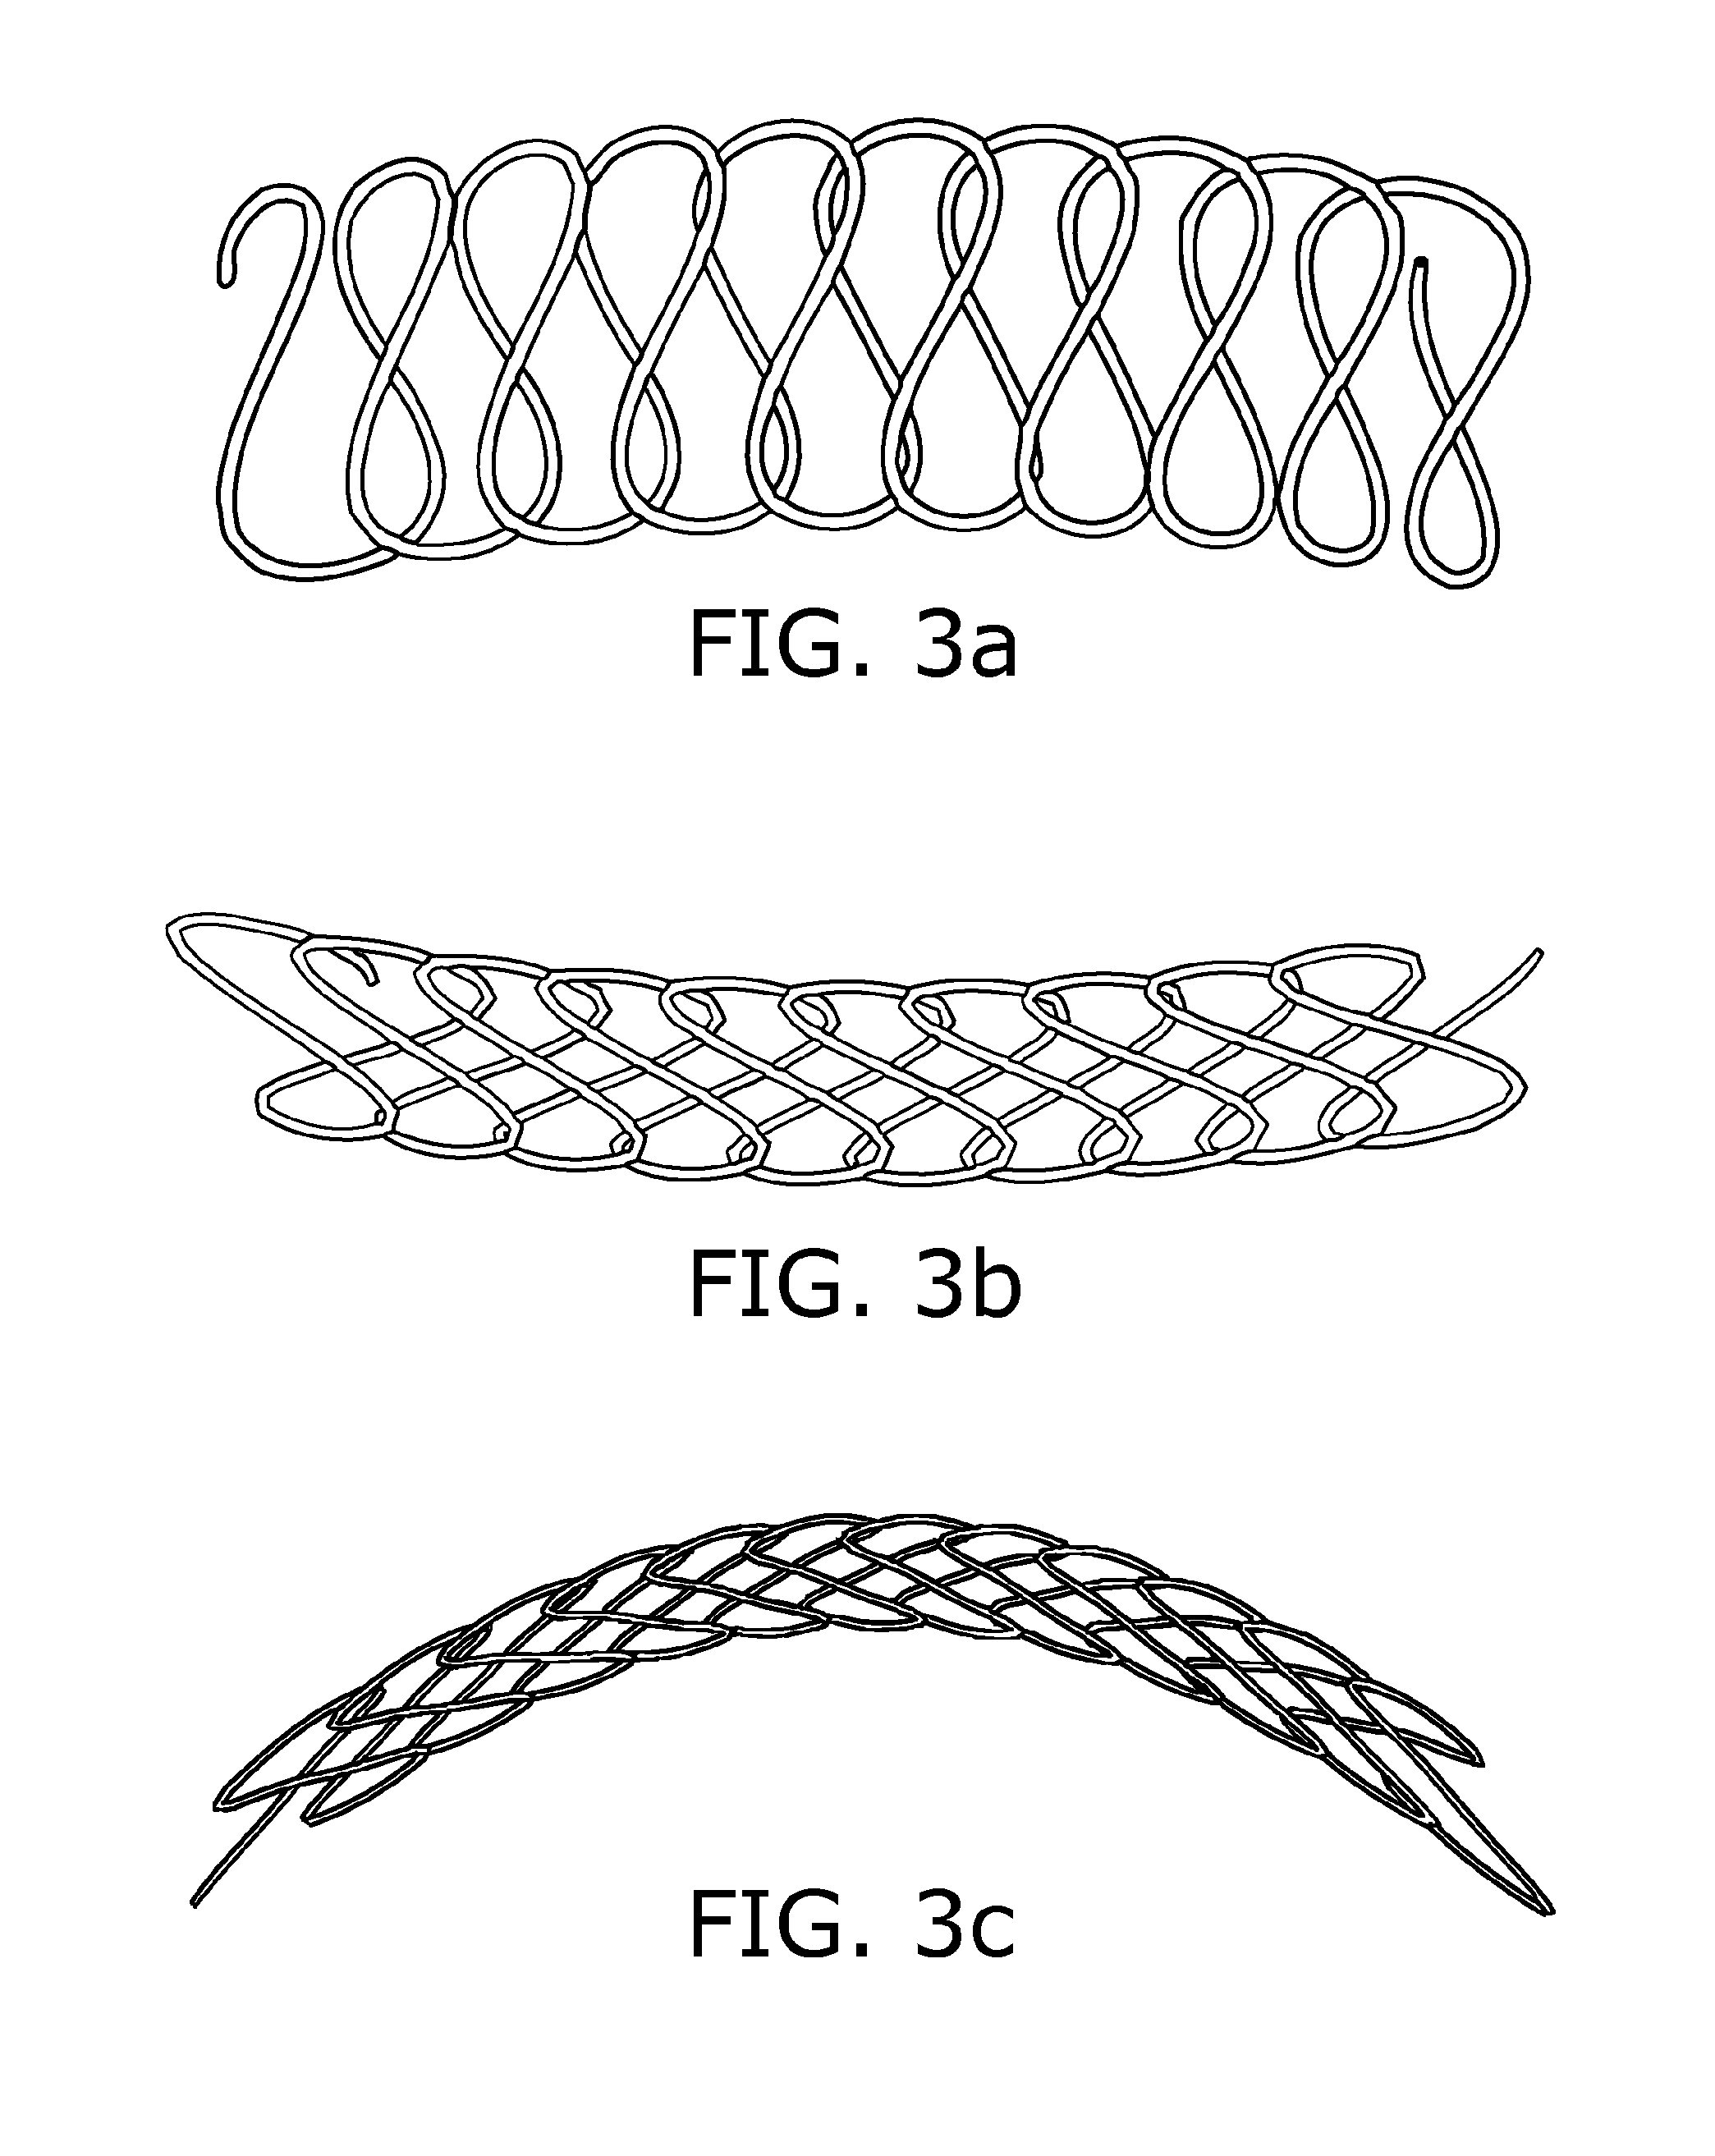 Coiled assembly for supporting the wall of a lumen